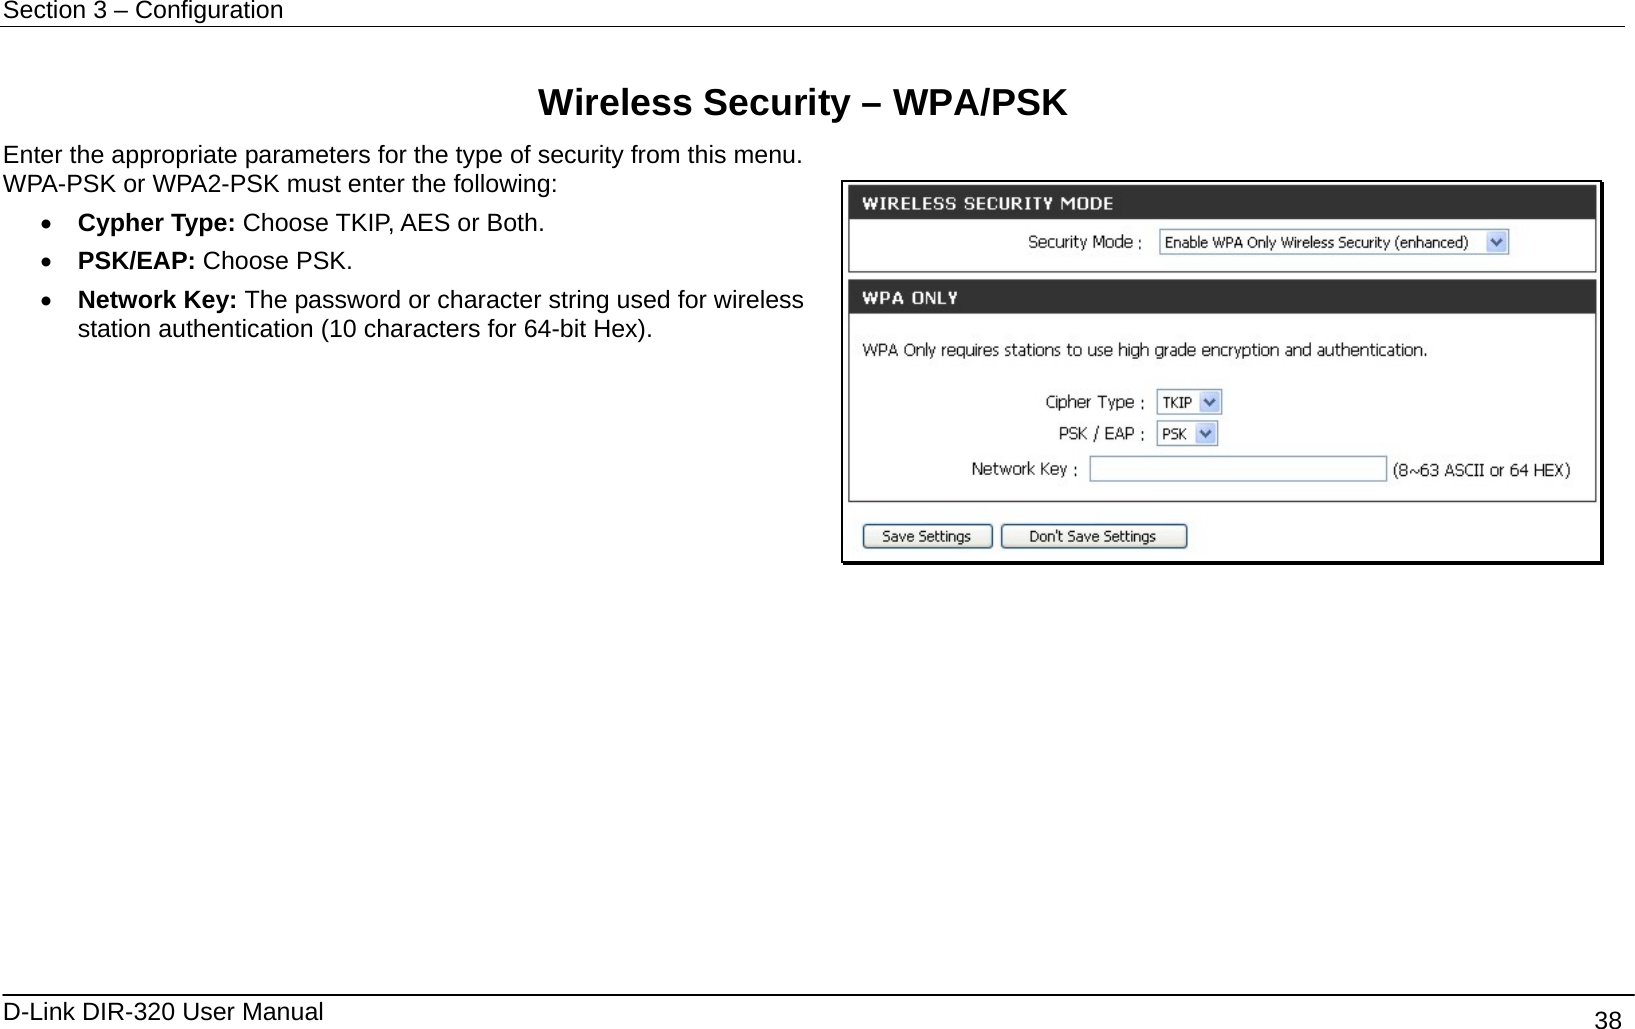 Section 3 – Configuration   D-Link DIR-320 User Manual                                       38  Wireless Security – WPA/PSK Enter the appropriate parameters for the type of security from this menu. WPA-PSK or WPA2-PSK must enter the following: •  Cypher Type: Choose TKIP, AES or Both. •  PSK/EAP: Choose PSK.   •  Network Key: The password or character string used for wireless station authentication (10 characters for 64-bit Hex).             